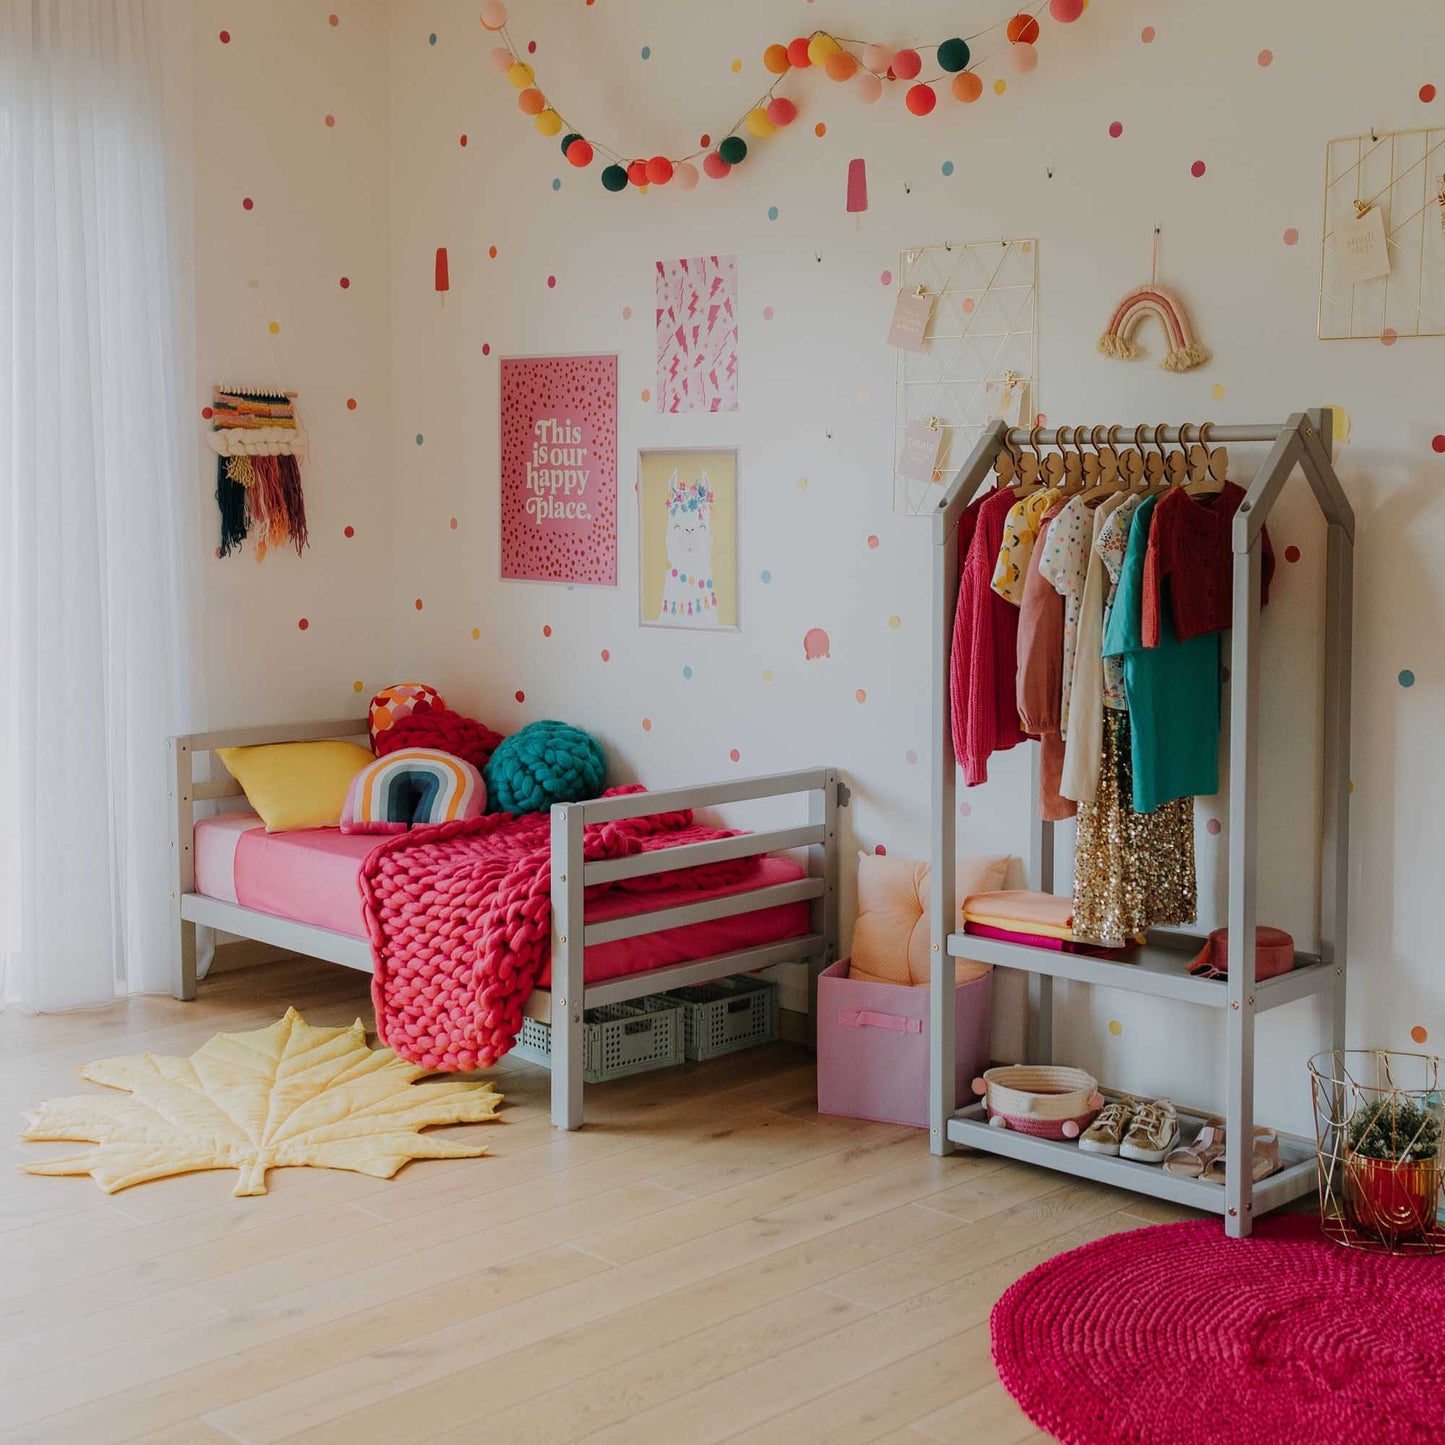 A long-lasting Sweet Home From Wood 2-in-1 kids' bed with a horizontal rail headboard and footboard in a girl's room with polka dots that grows with the child.